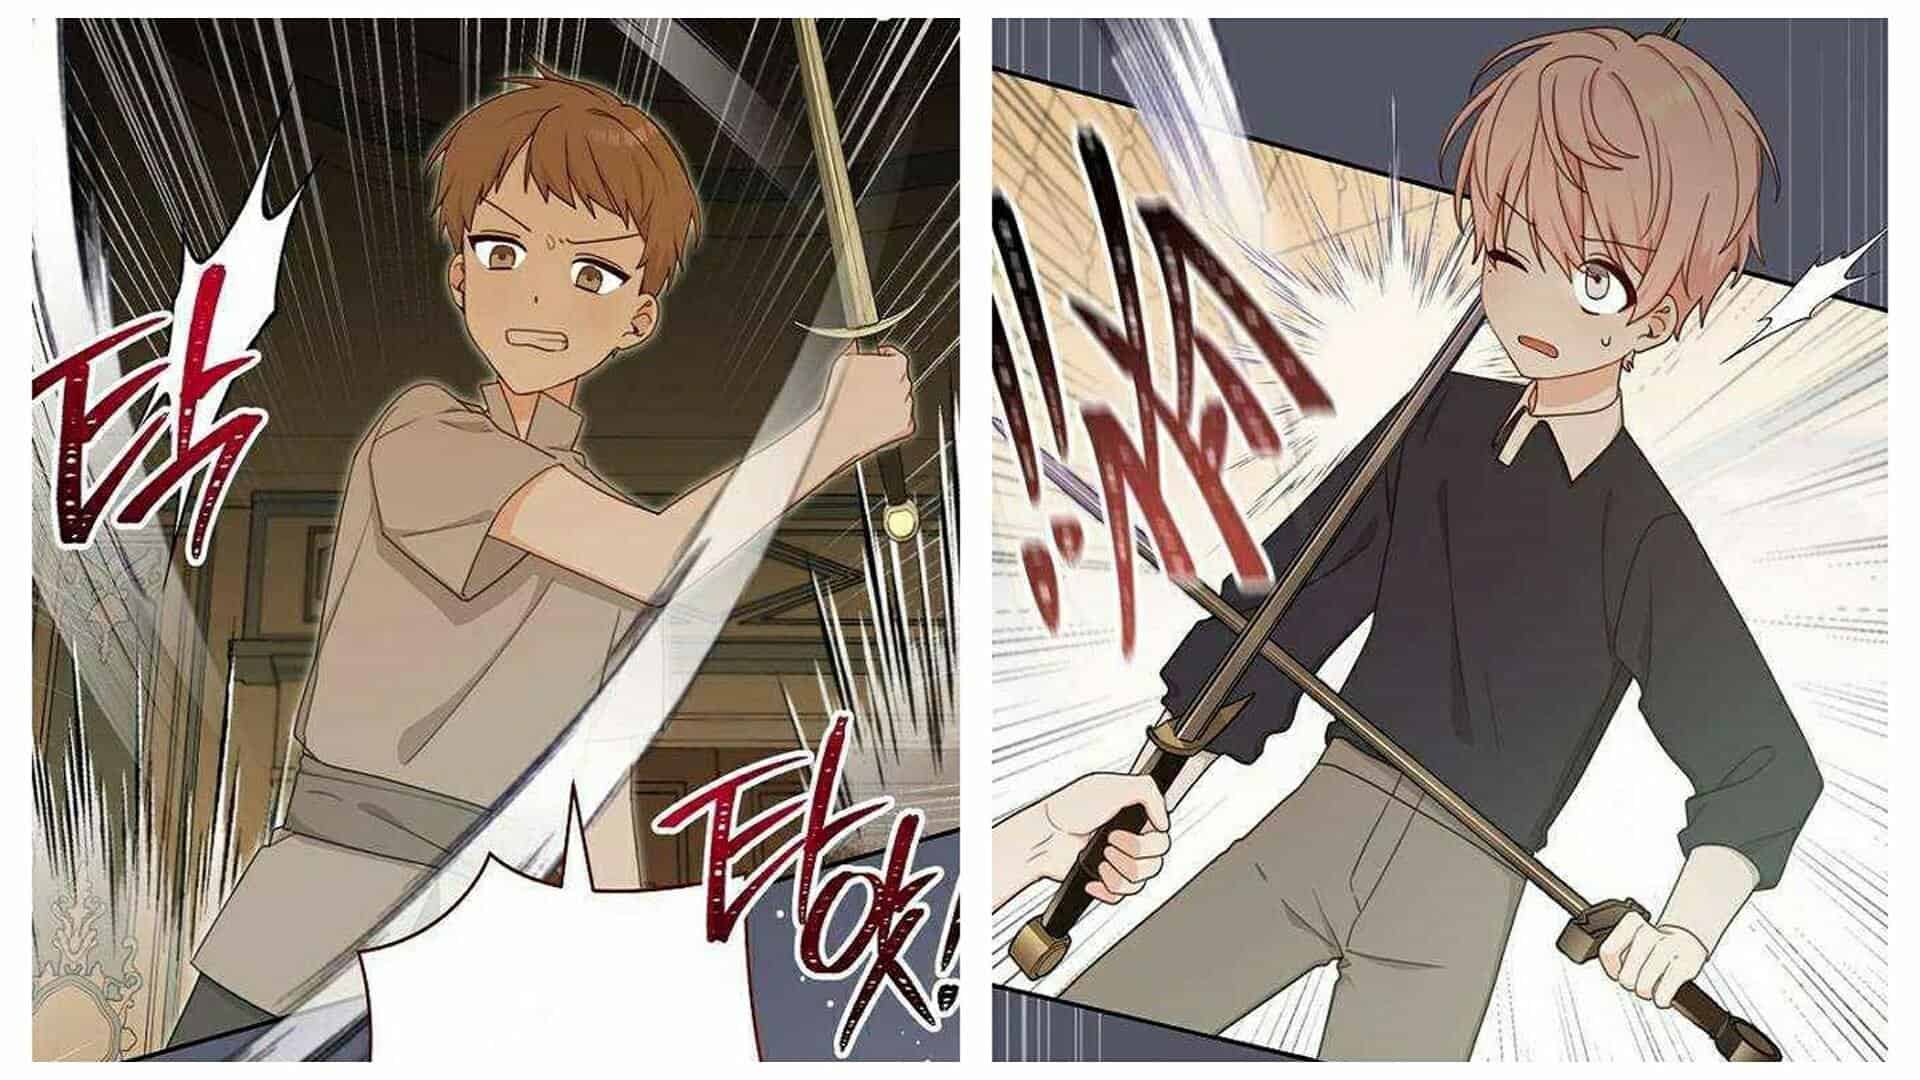 Cade Attacking Akkad Trying To Bully Him - Please Treat Your Friends Preciously Chapter 7 (Credits: Kakao Page)